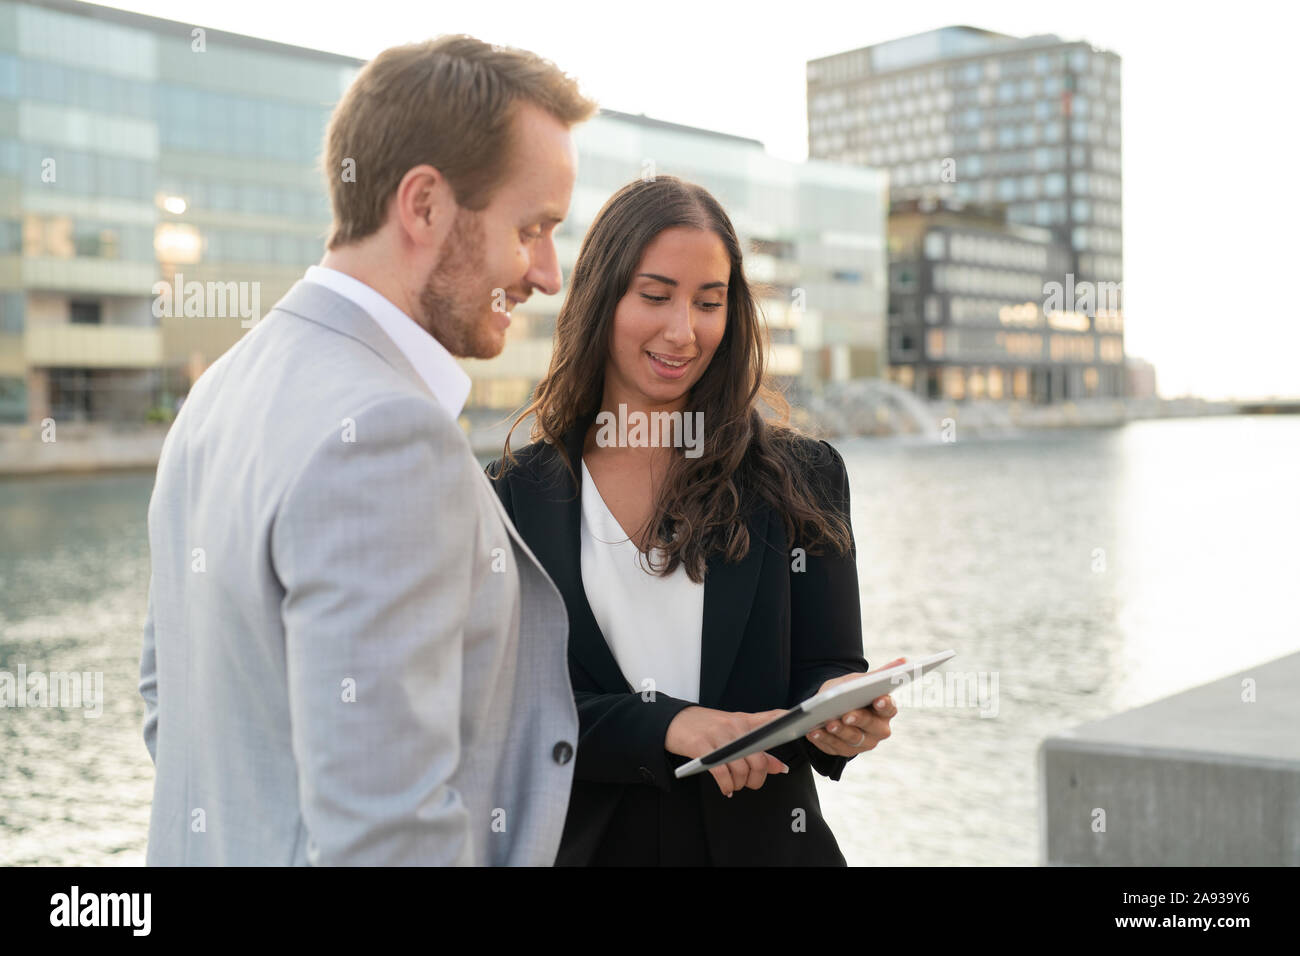 Business people talking outside Stock Photo